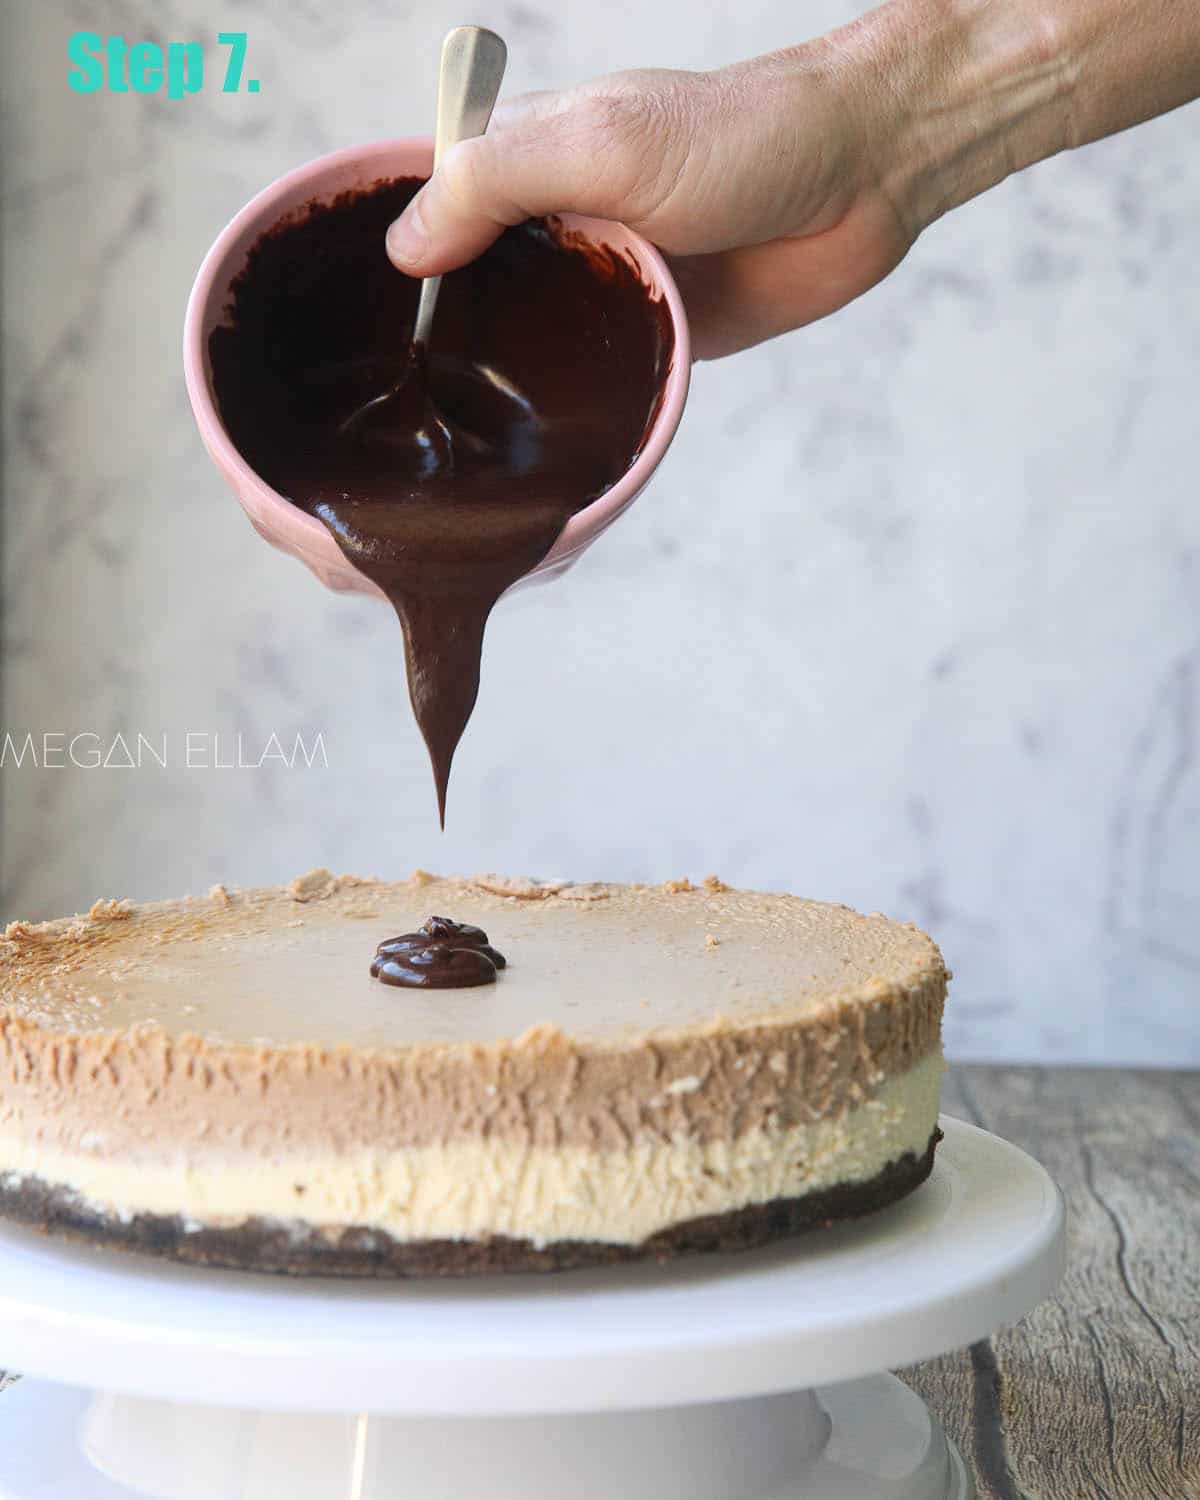 Chocolate pouring from a bowl onto cheesecake.